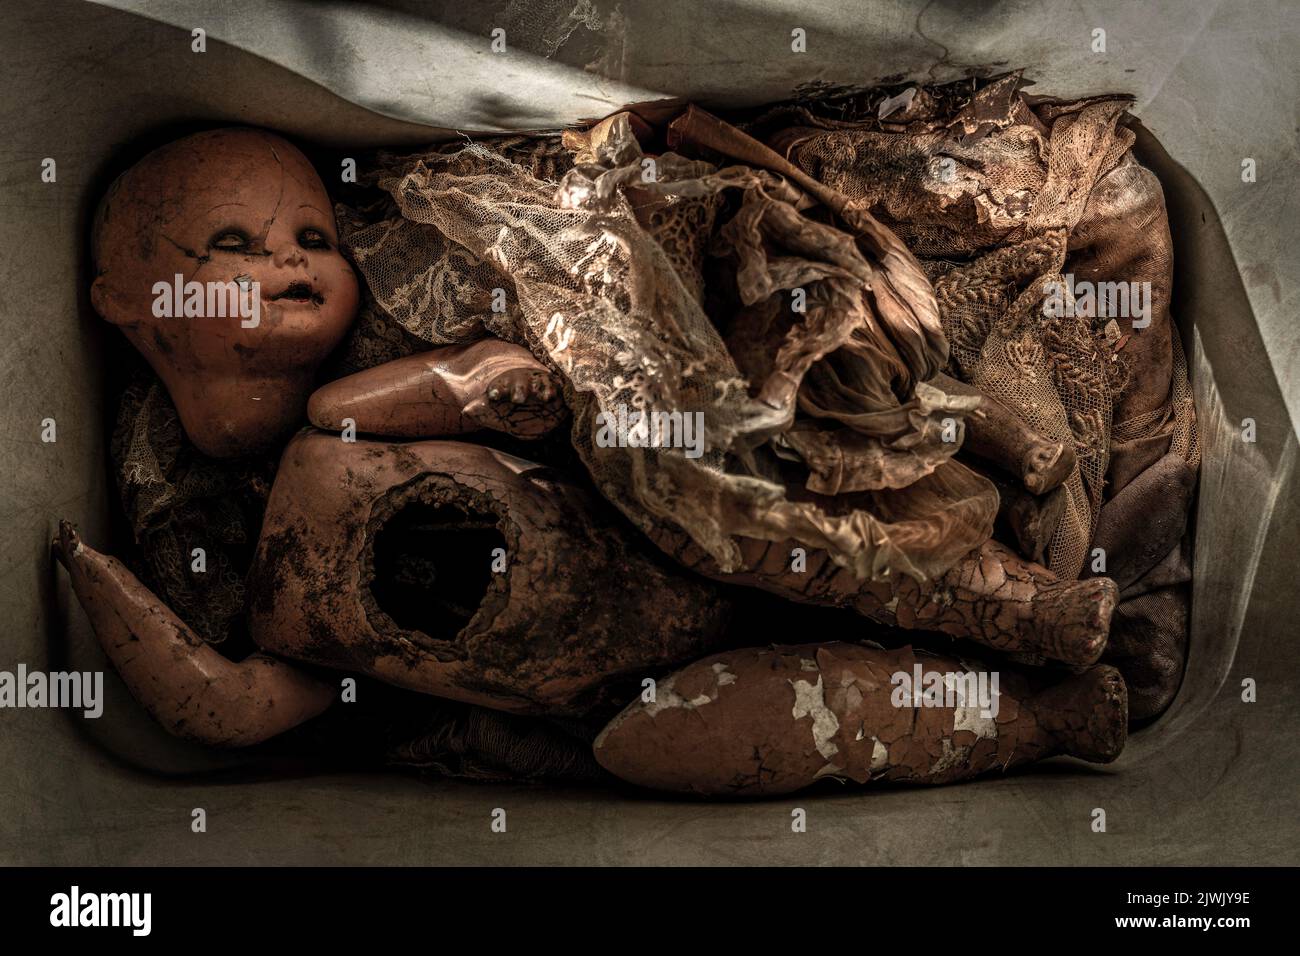 Dirty and damaged doll covered by rags inside a box. Scary Baby Doll. Disturbing horror movie concept for dark mood Stock Photo